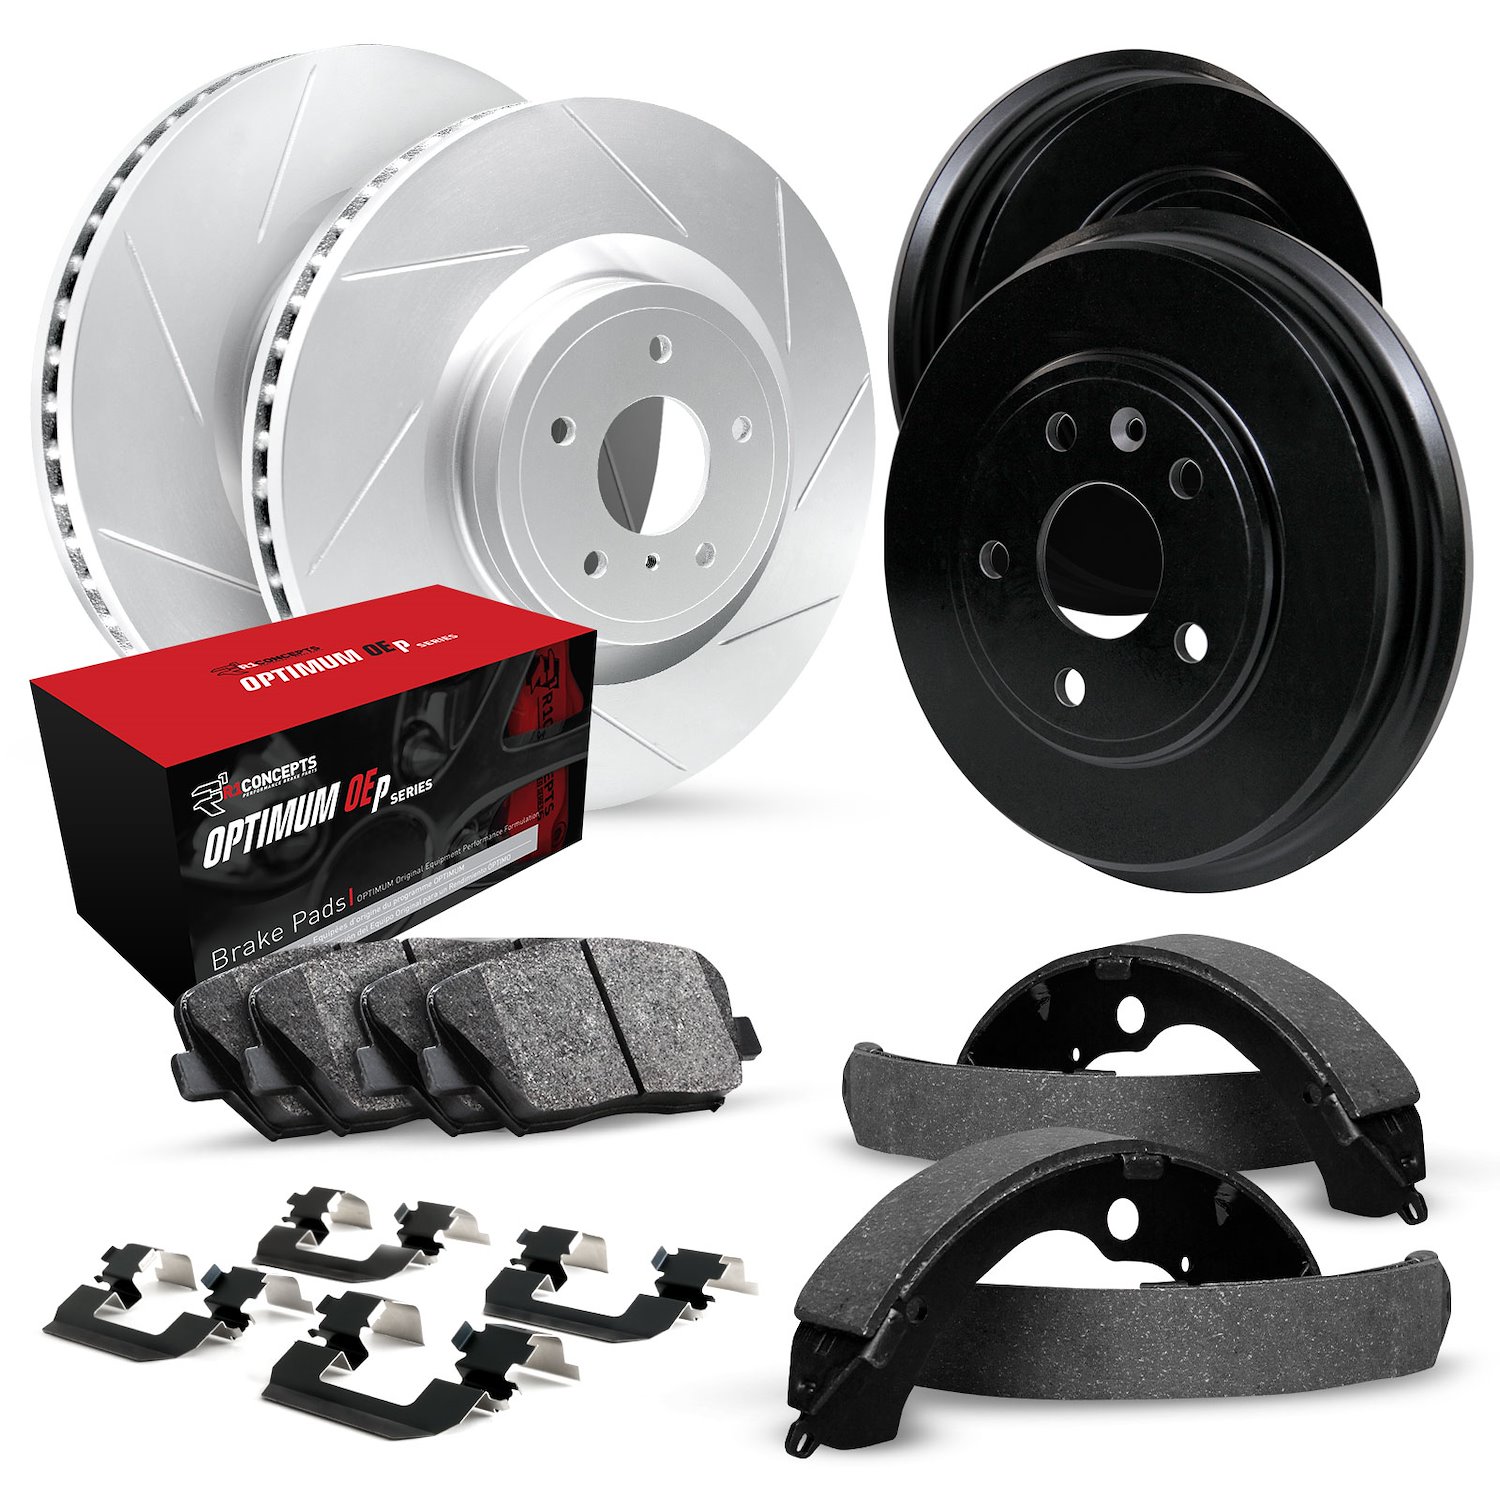 GEO-Carbon Slotted Brake Rotor & Drum Set w/Optimum OE Pads, Shoes, & Hardware, 1997-2003 Ford/Lincoln/Mercury/Mazda